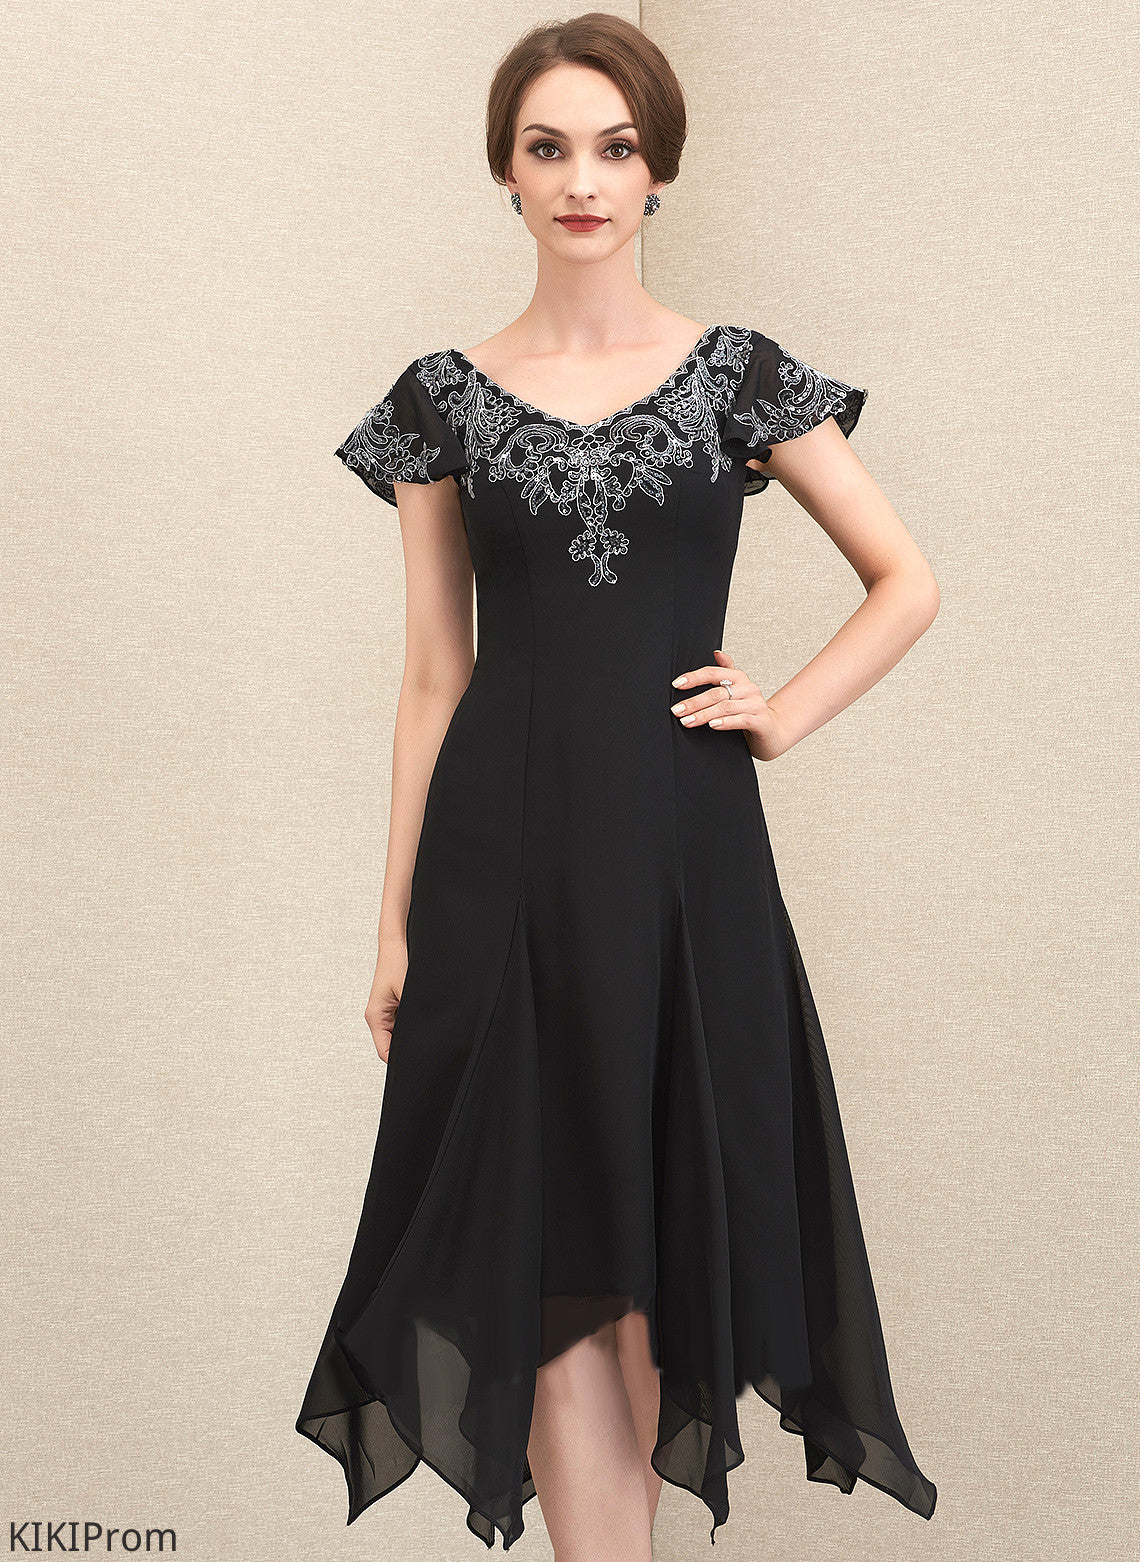 Bride Lace V-neck Chiffon Dress Mother With Mother of the Bride Dresses Kendra A-Line Sequins of Tea-Length the